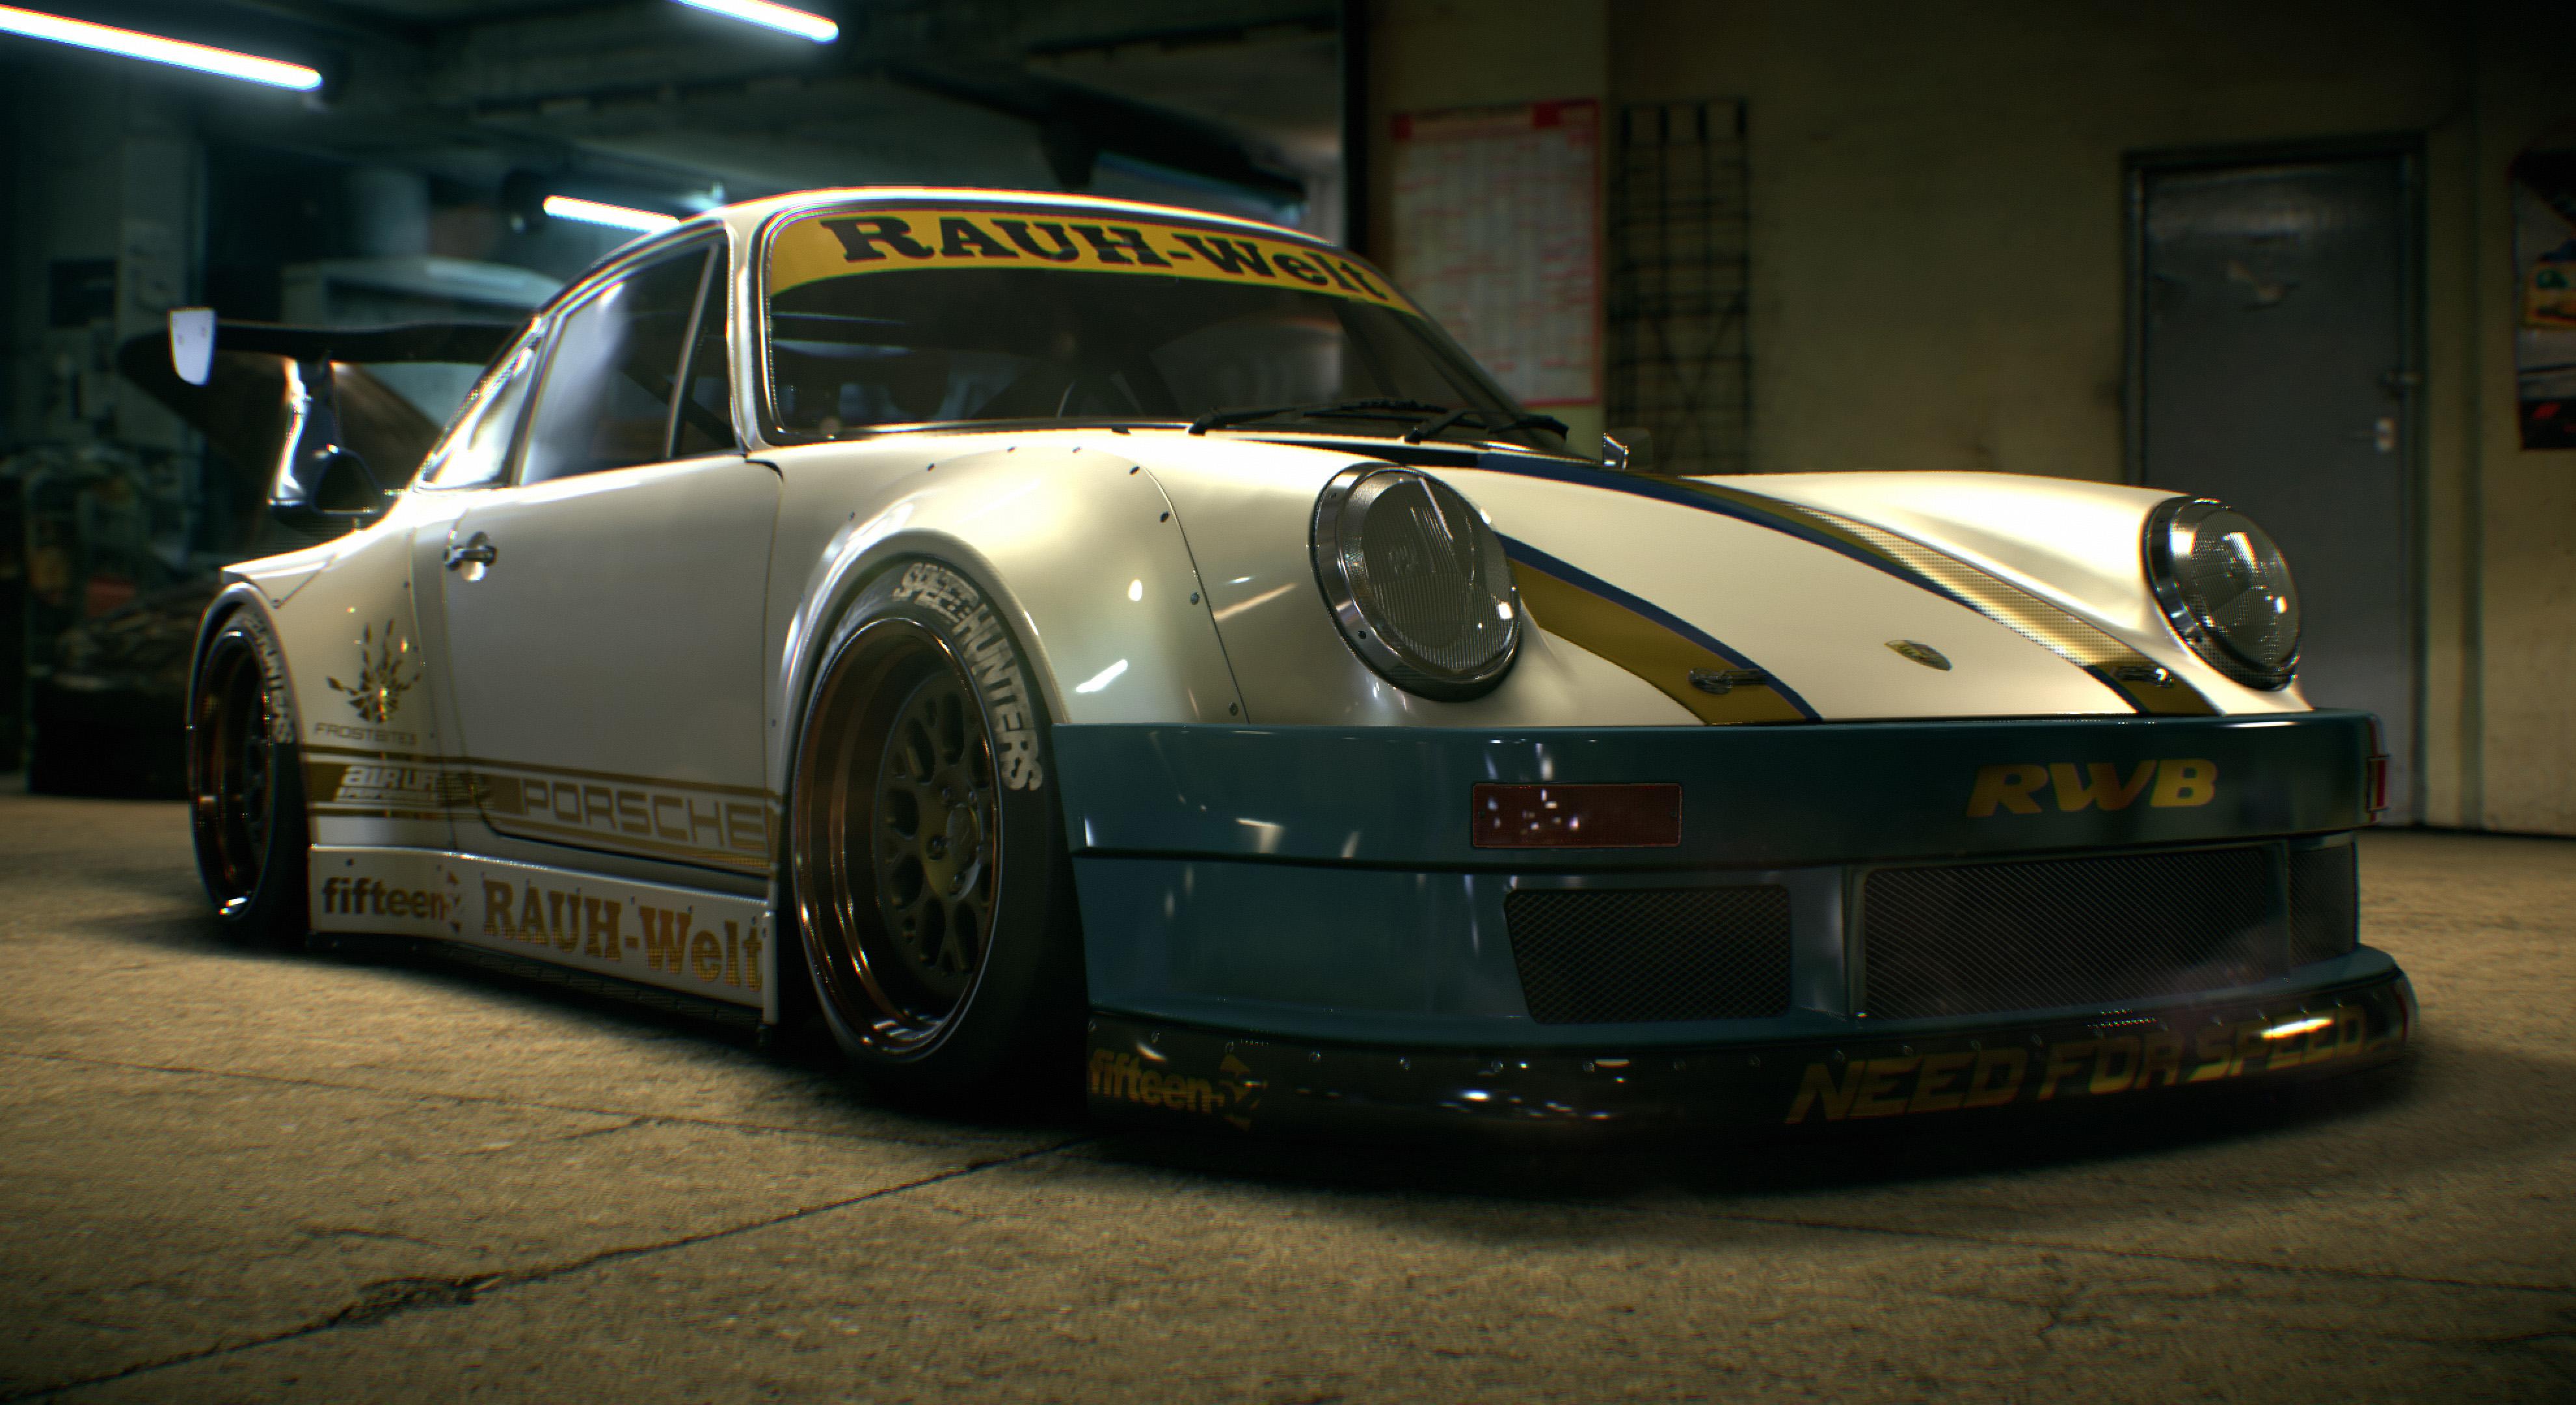 Need for speed 2015 free part locations map